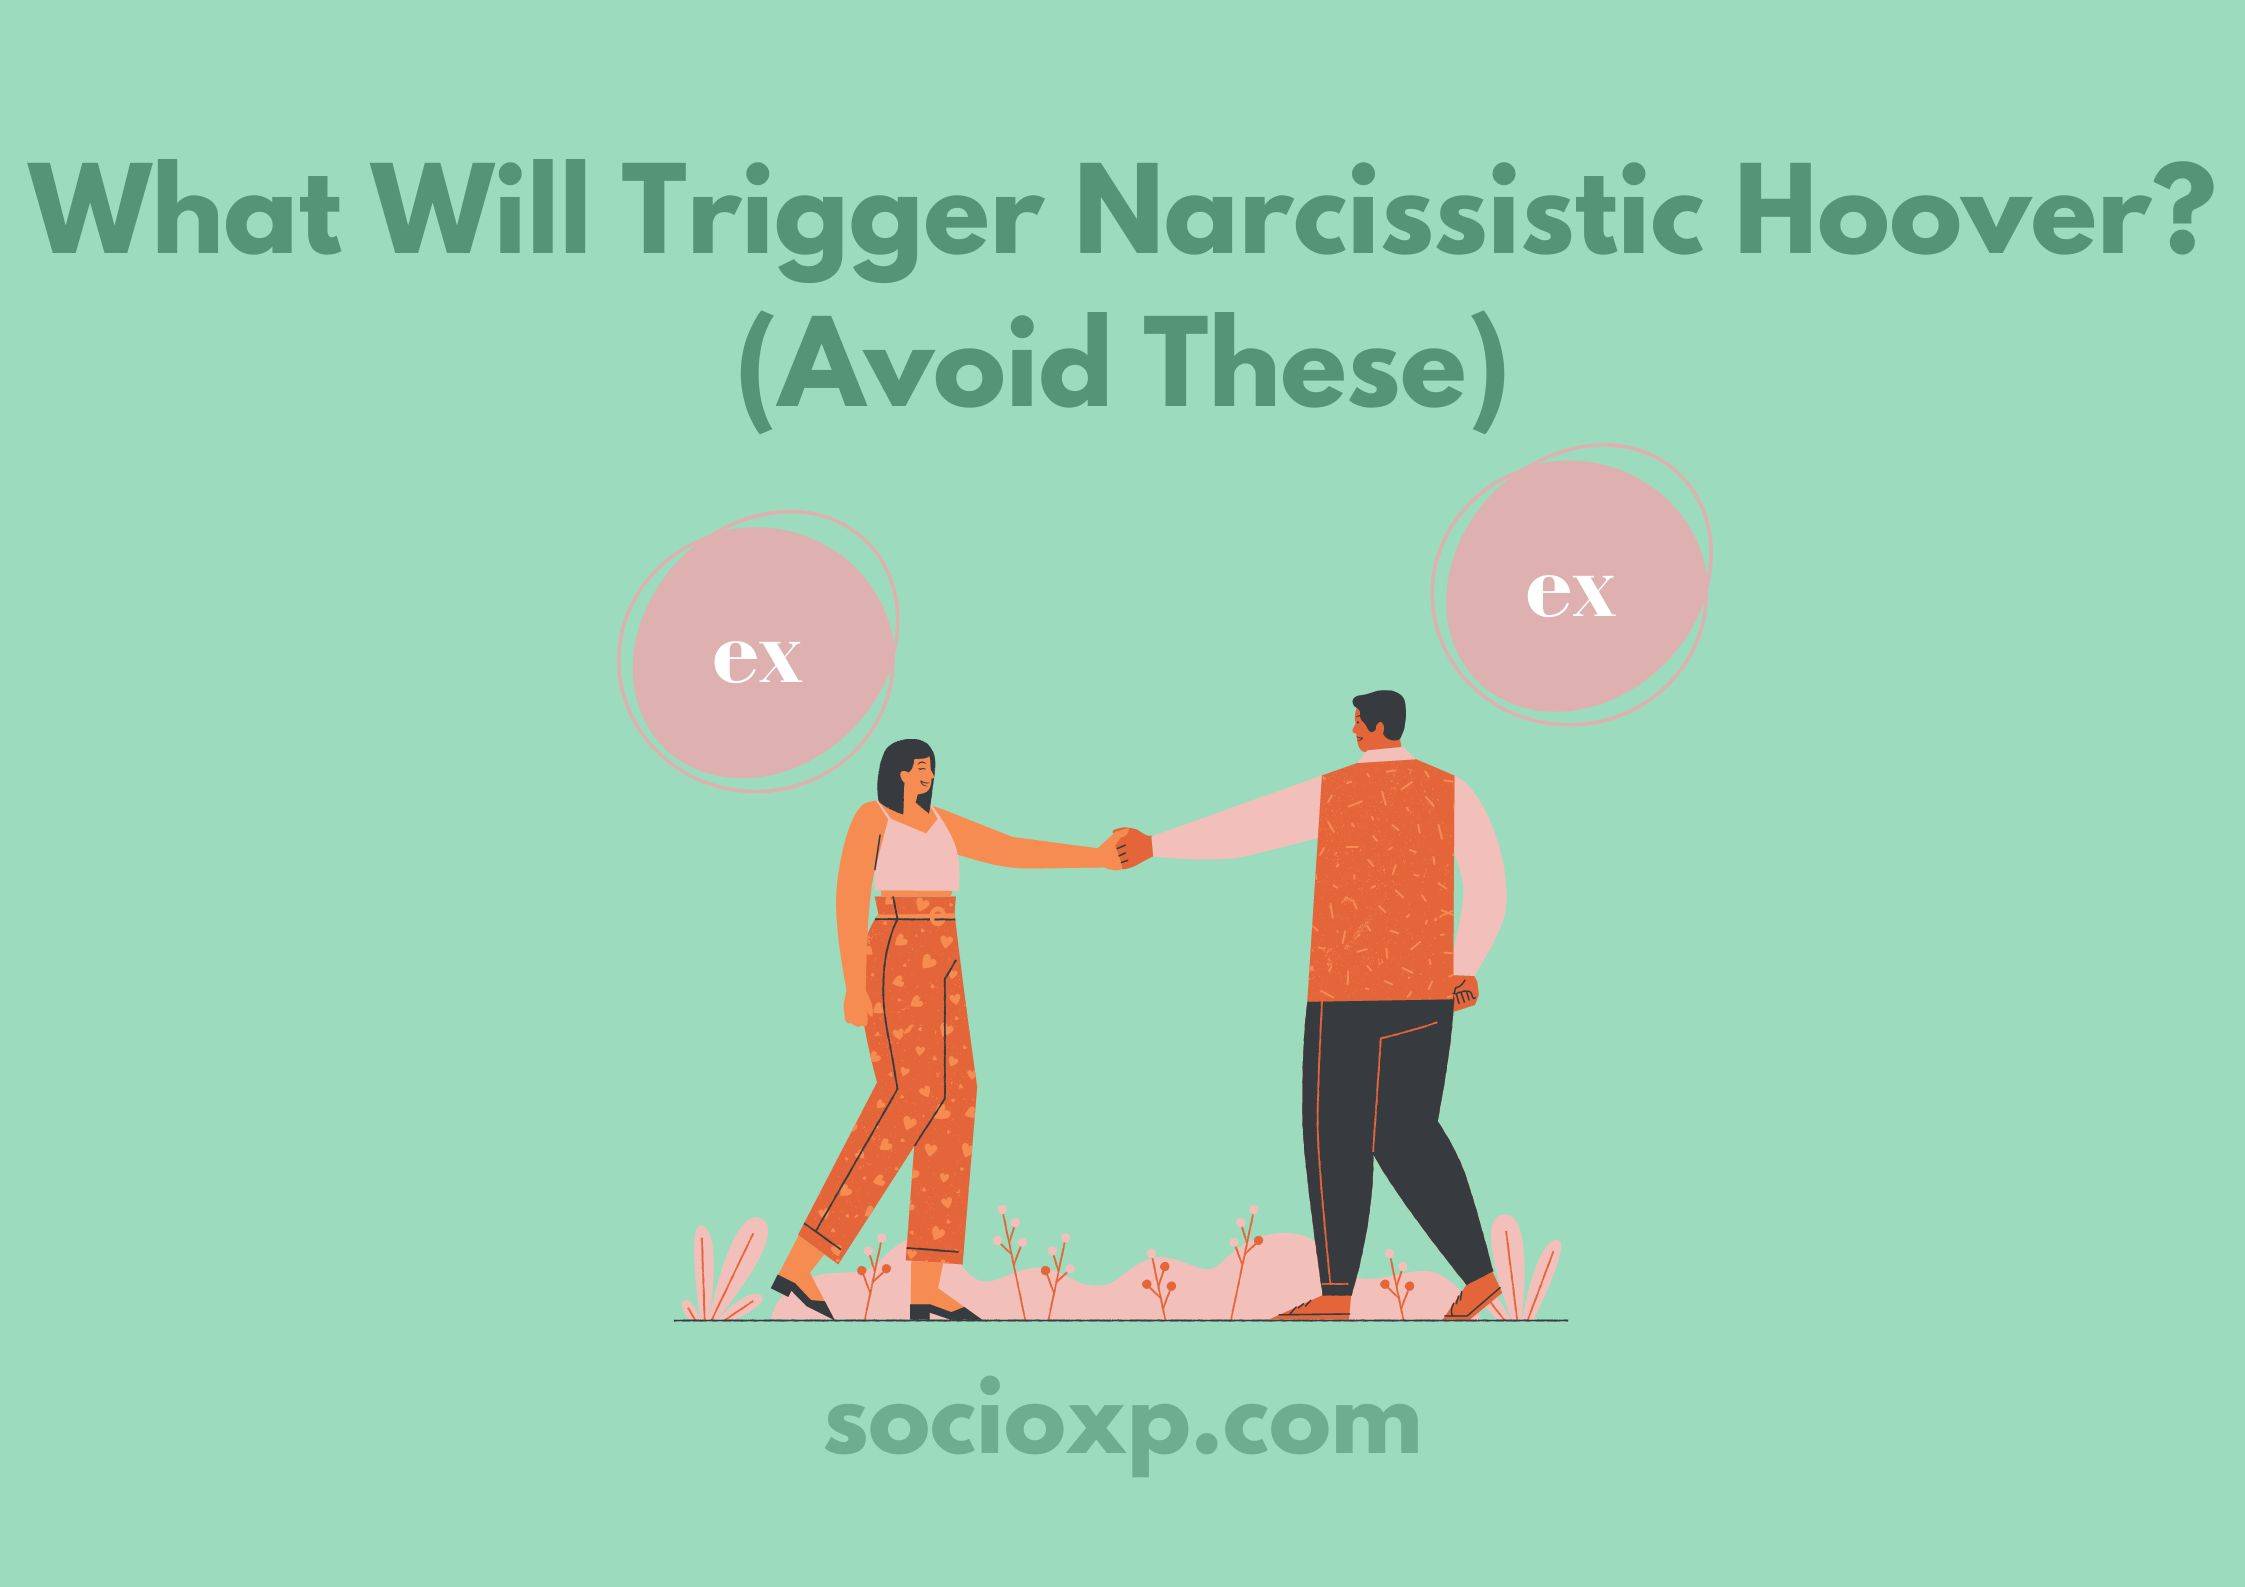 What Will Trigger Narcissistic Hoover? (Avoid These)